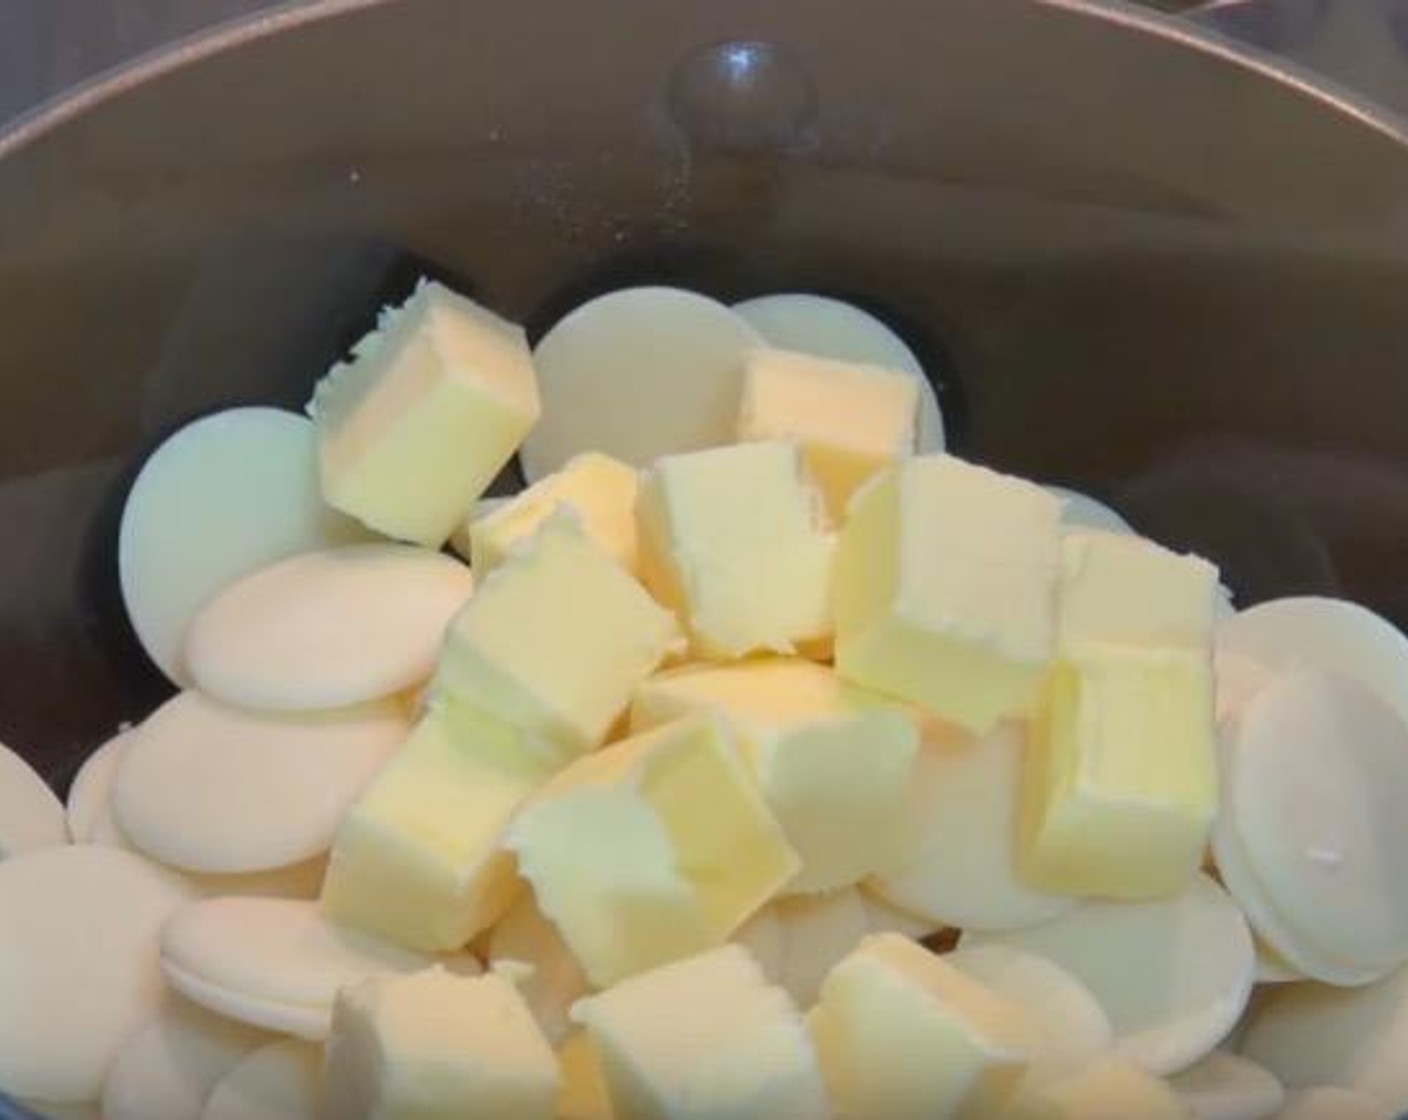 step 1 Put White Chocolate (1 3/4 cups) and Butter (1/3 cup) in a double boiler, allow it to melt and stir occasionally. Then take the bowl out of the pot and cool off the chocolate for 10 minutes.